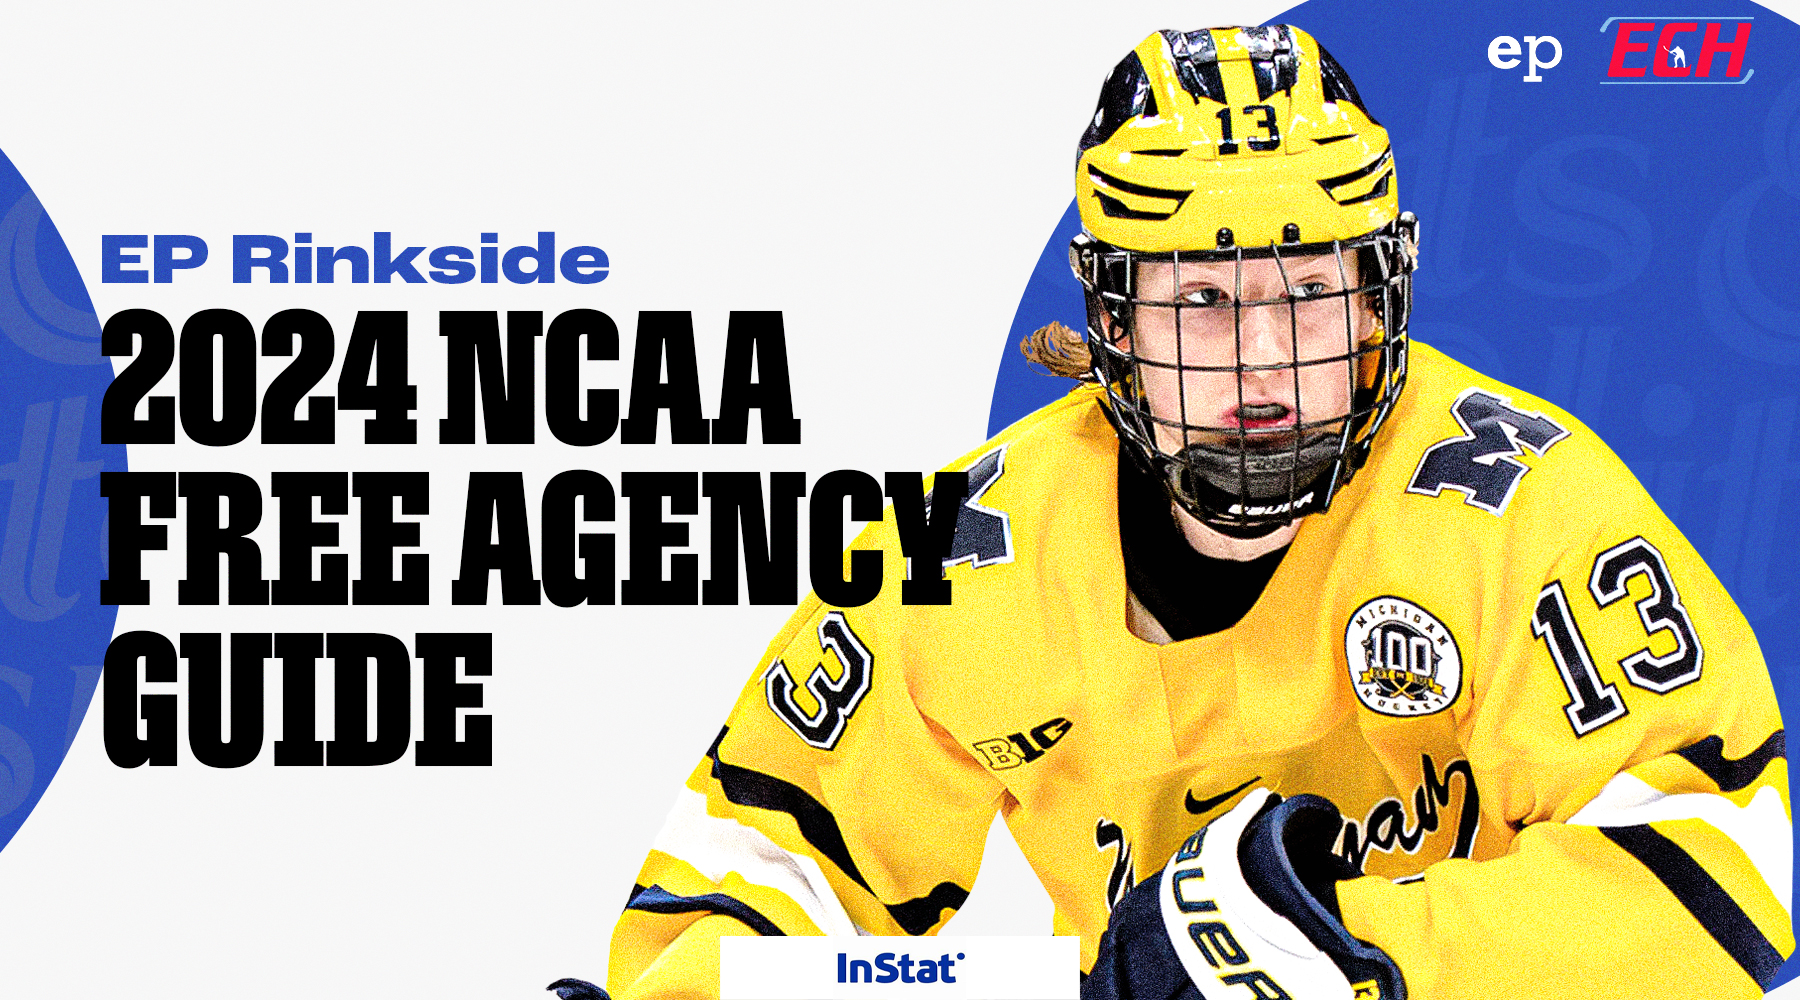 The EP Rinkside 2024 NCAA Free Agency Guide